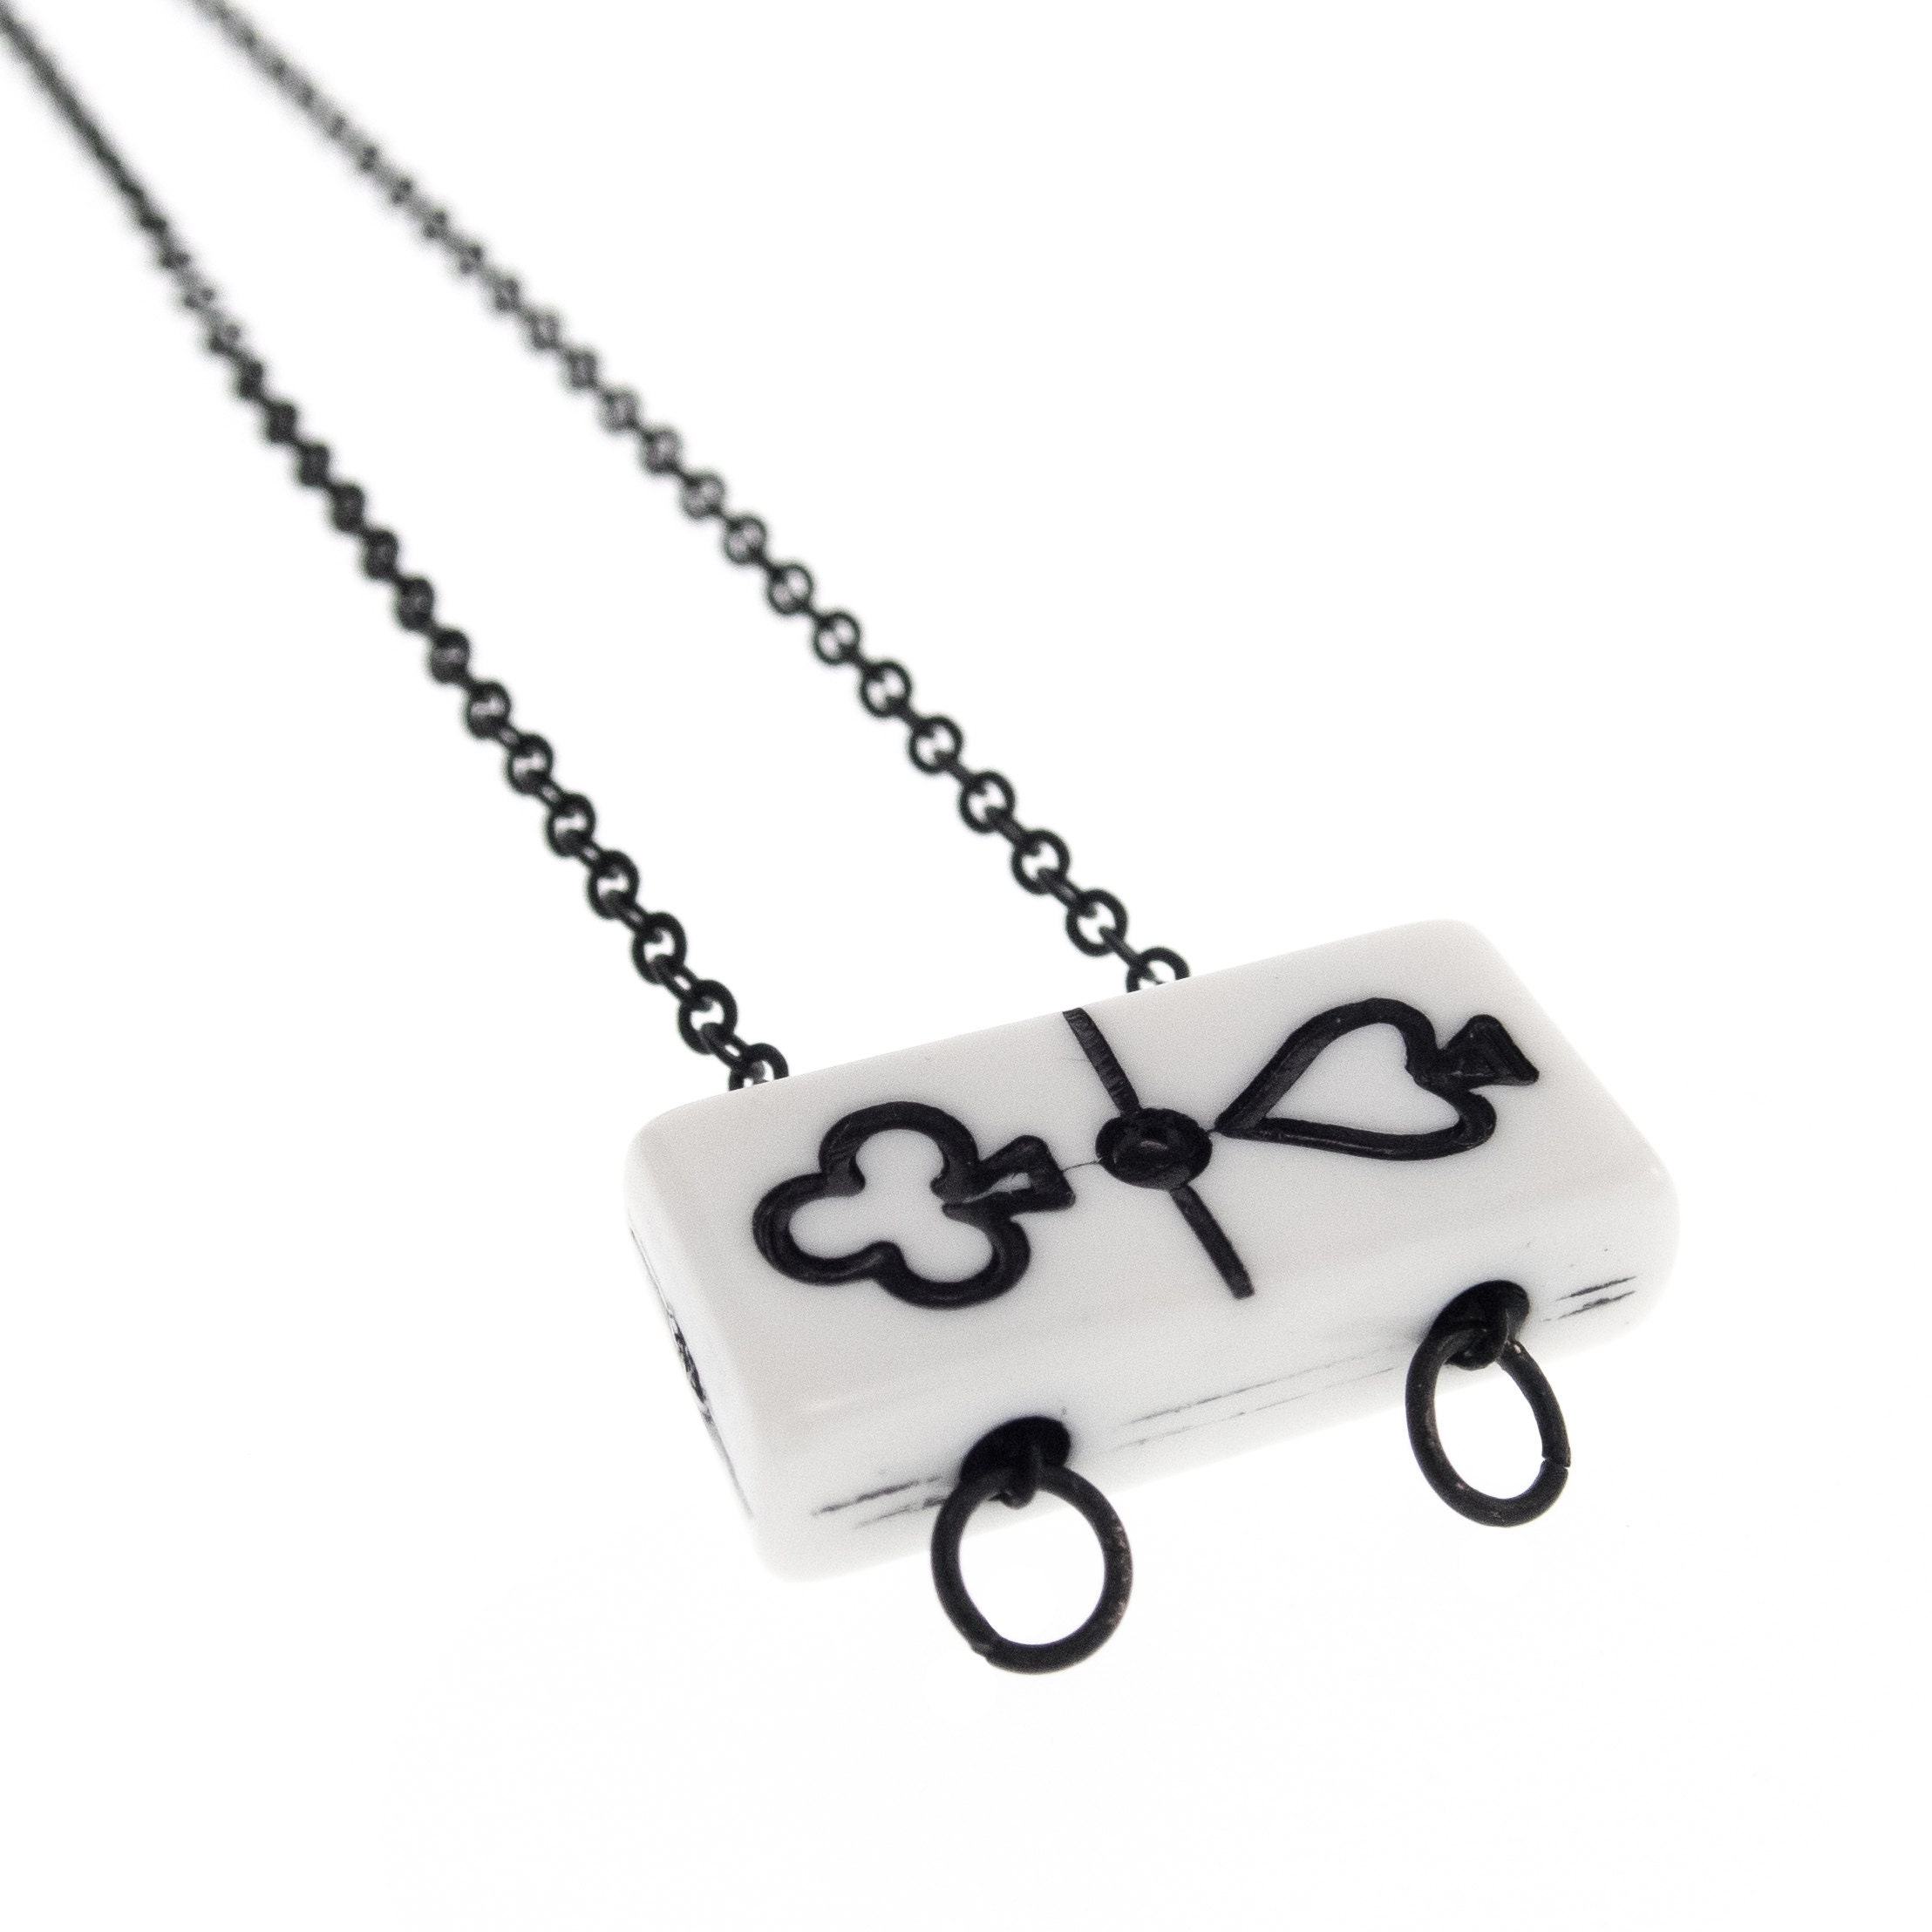 handmade domino necklace with domino tile charm